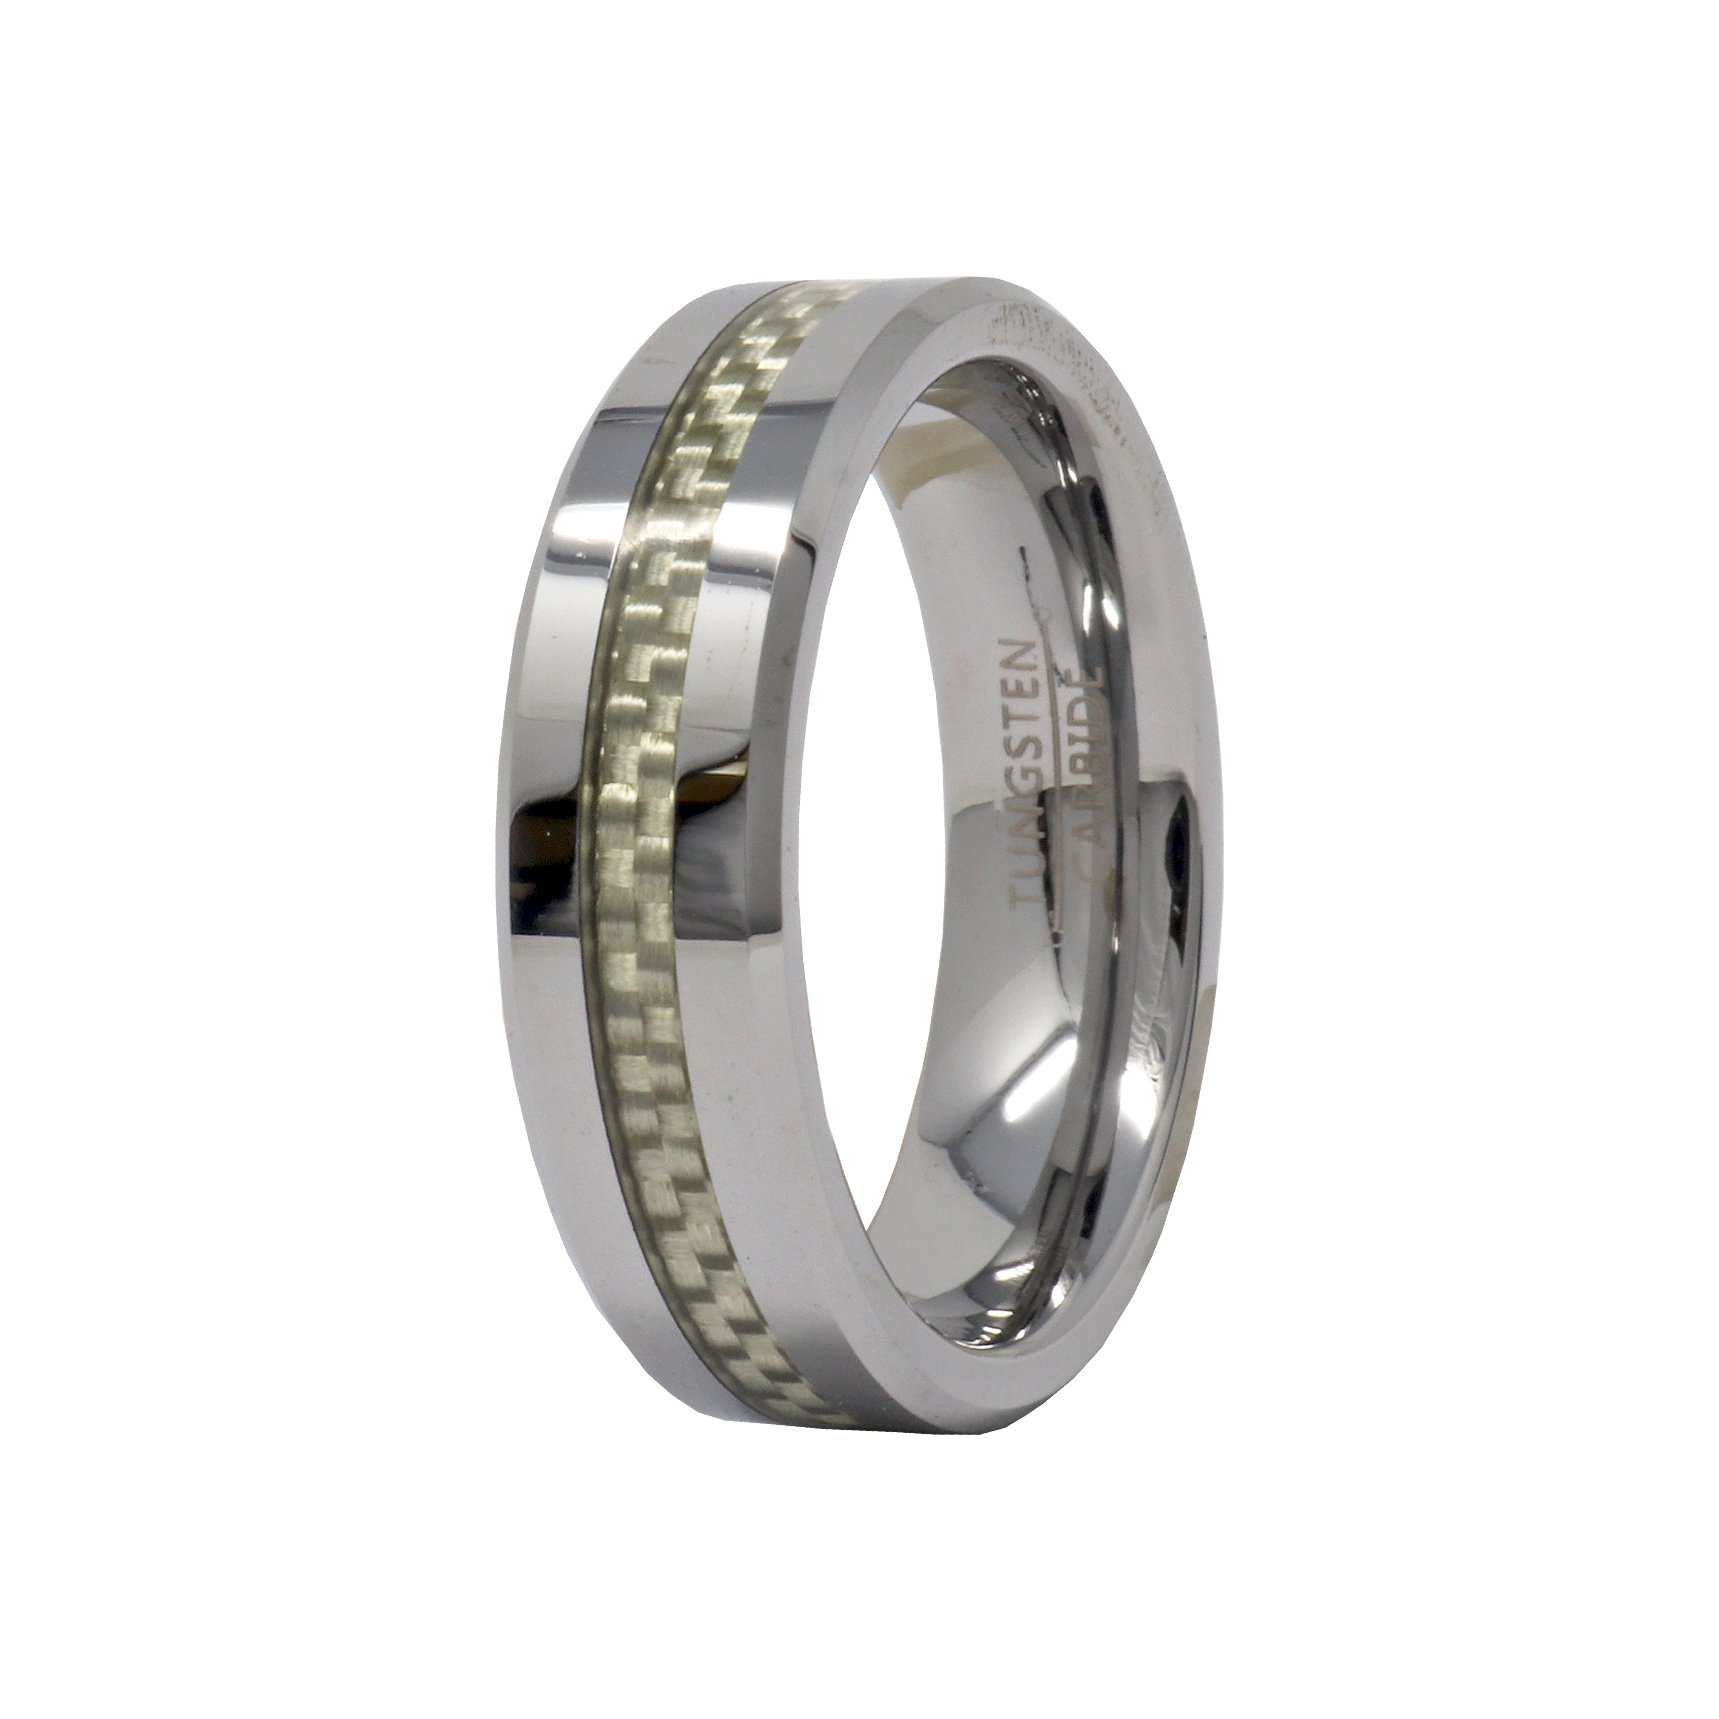 Tungsten Ring Size 10 - 6mm Gray Carbon Fiber Inlay